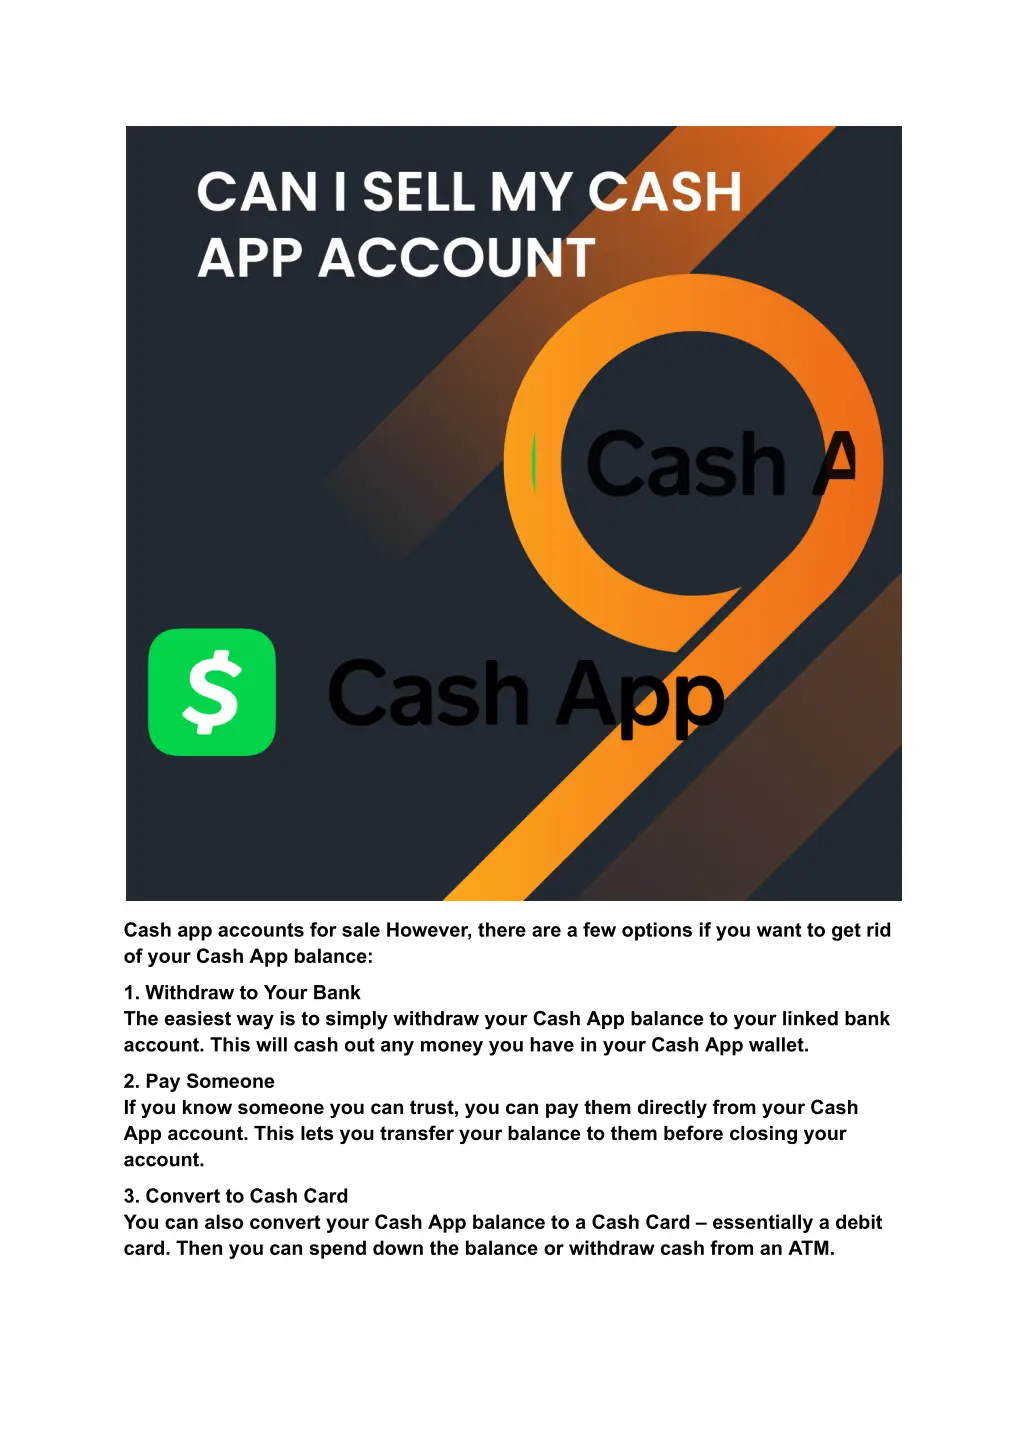 cash app accounts for sale however there